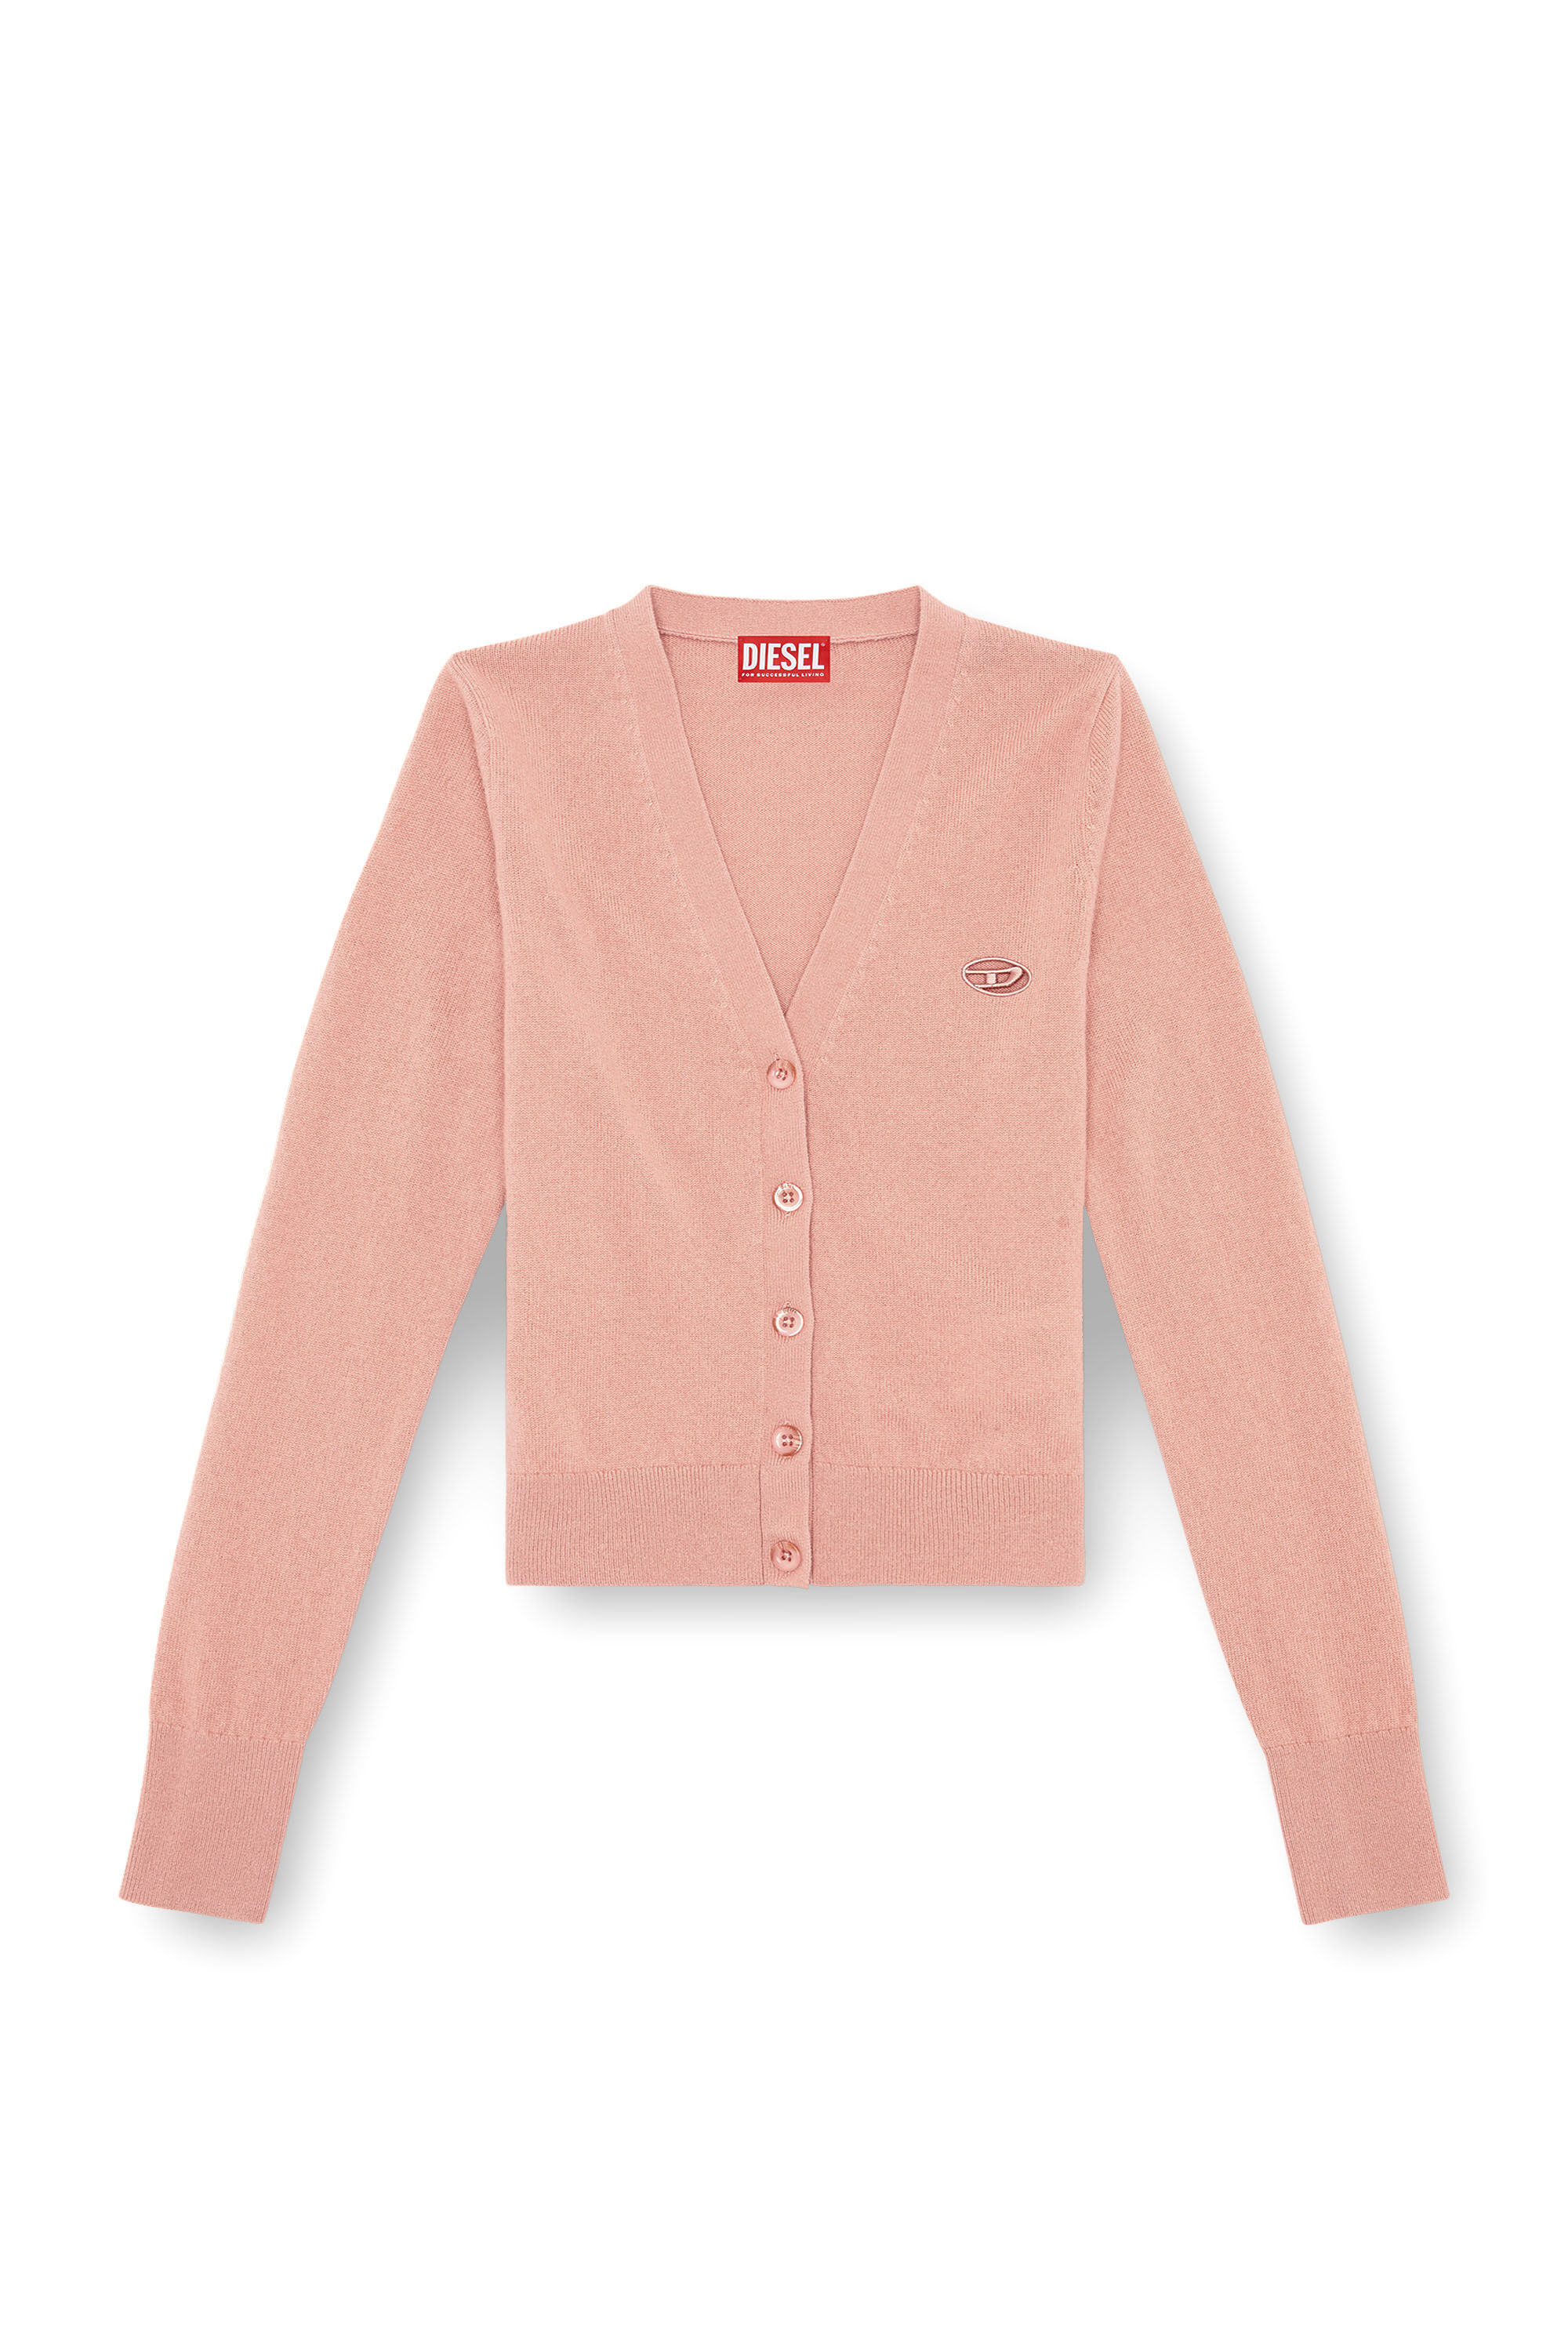 Diesel - M-ARTE, Woman Wool and cashmere cardigan in Pink - Image 2